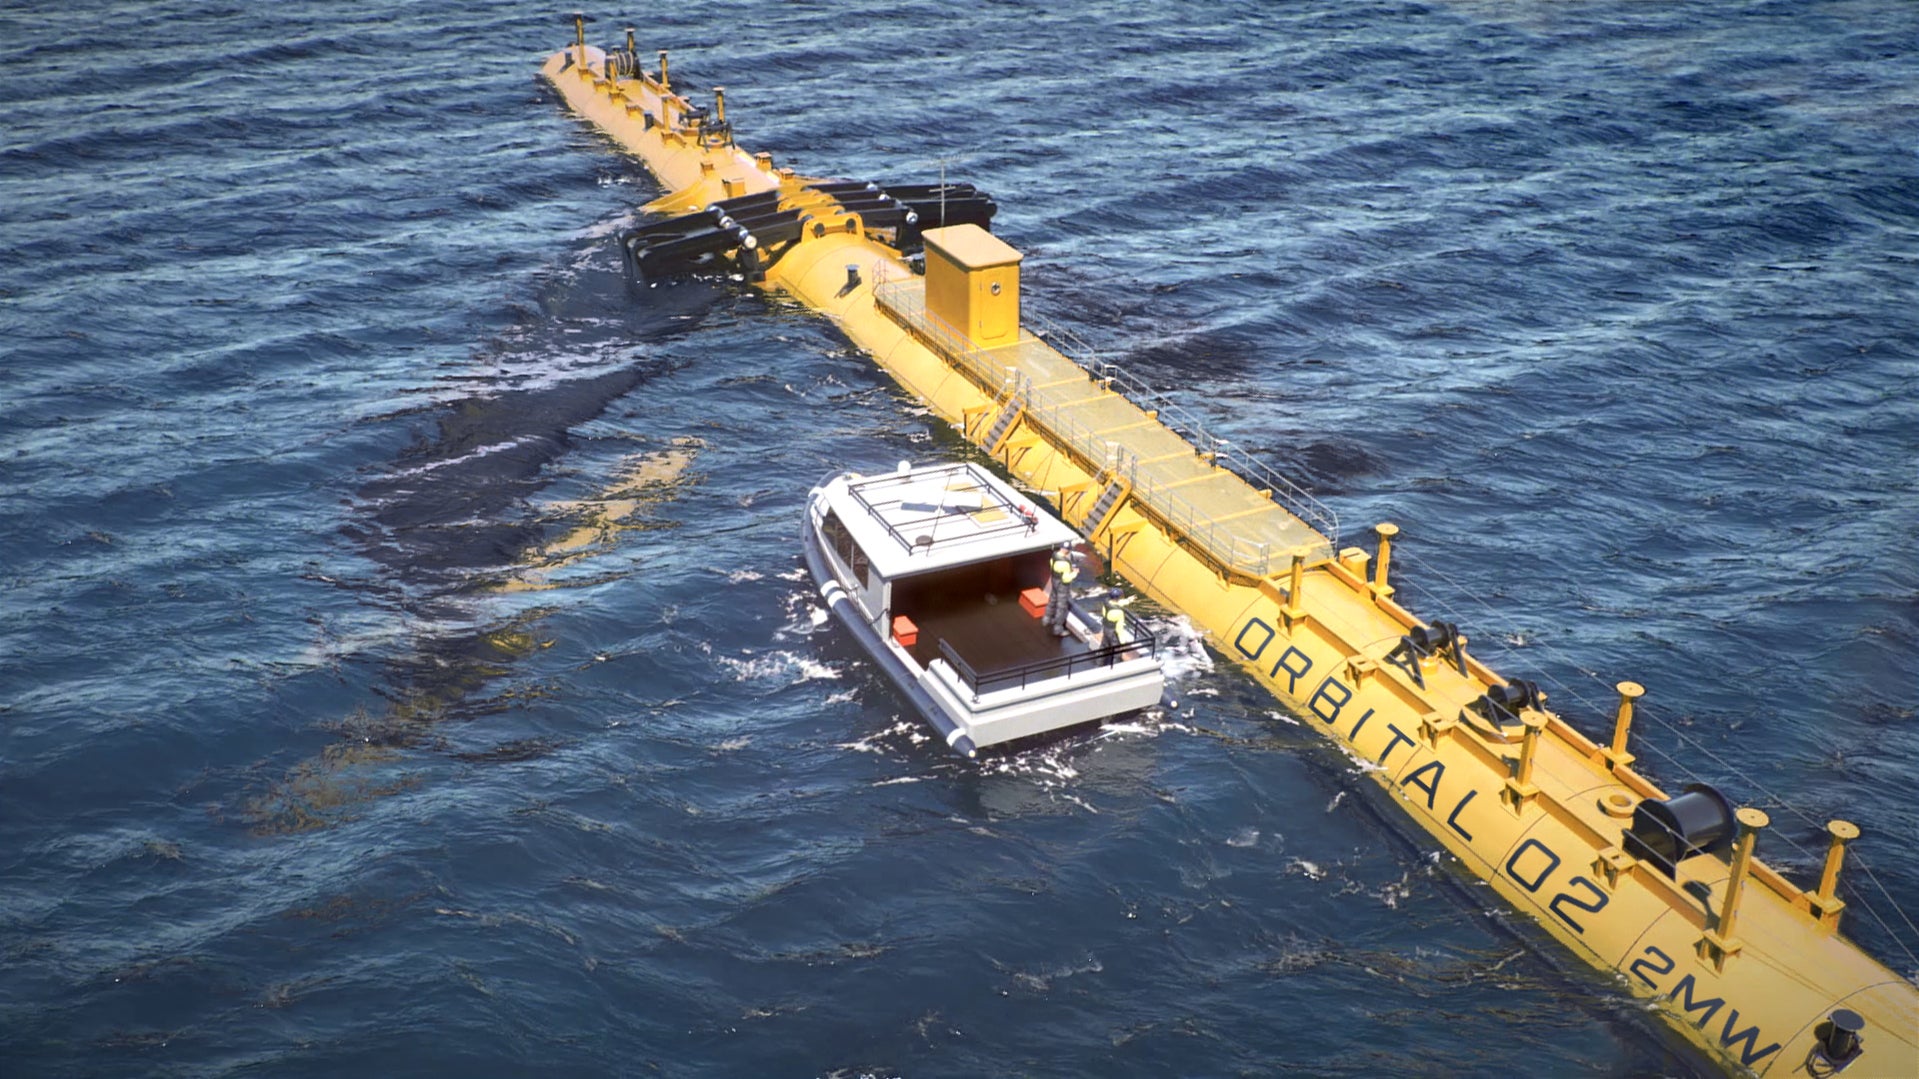 Tidal stream is being touted as an important renewable energy source in the UK